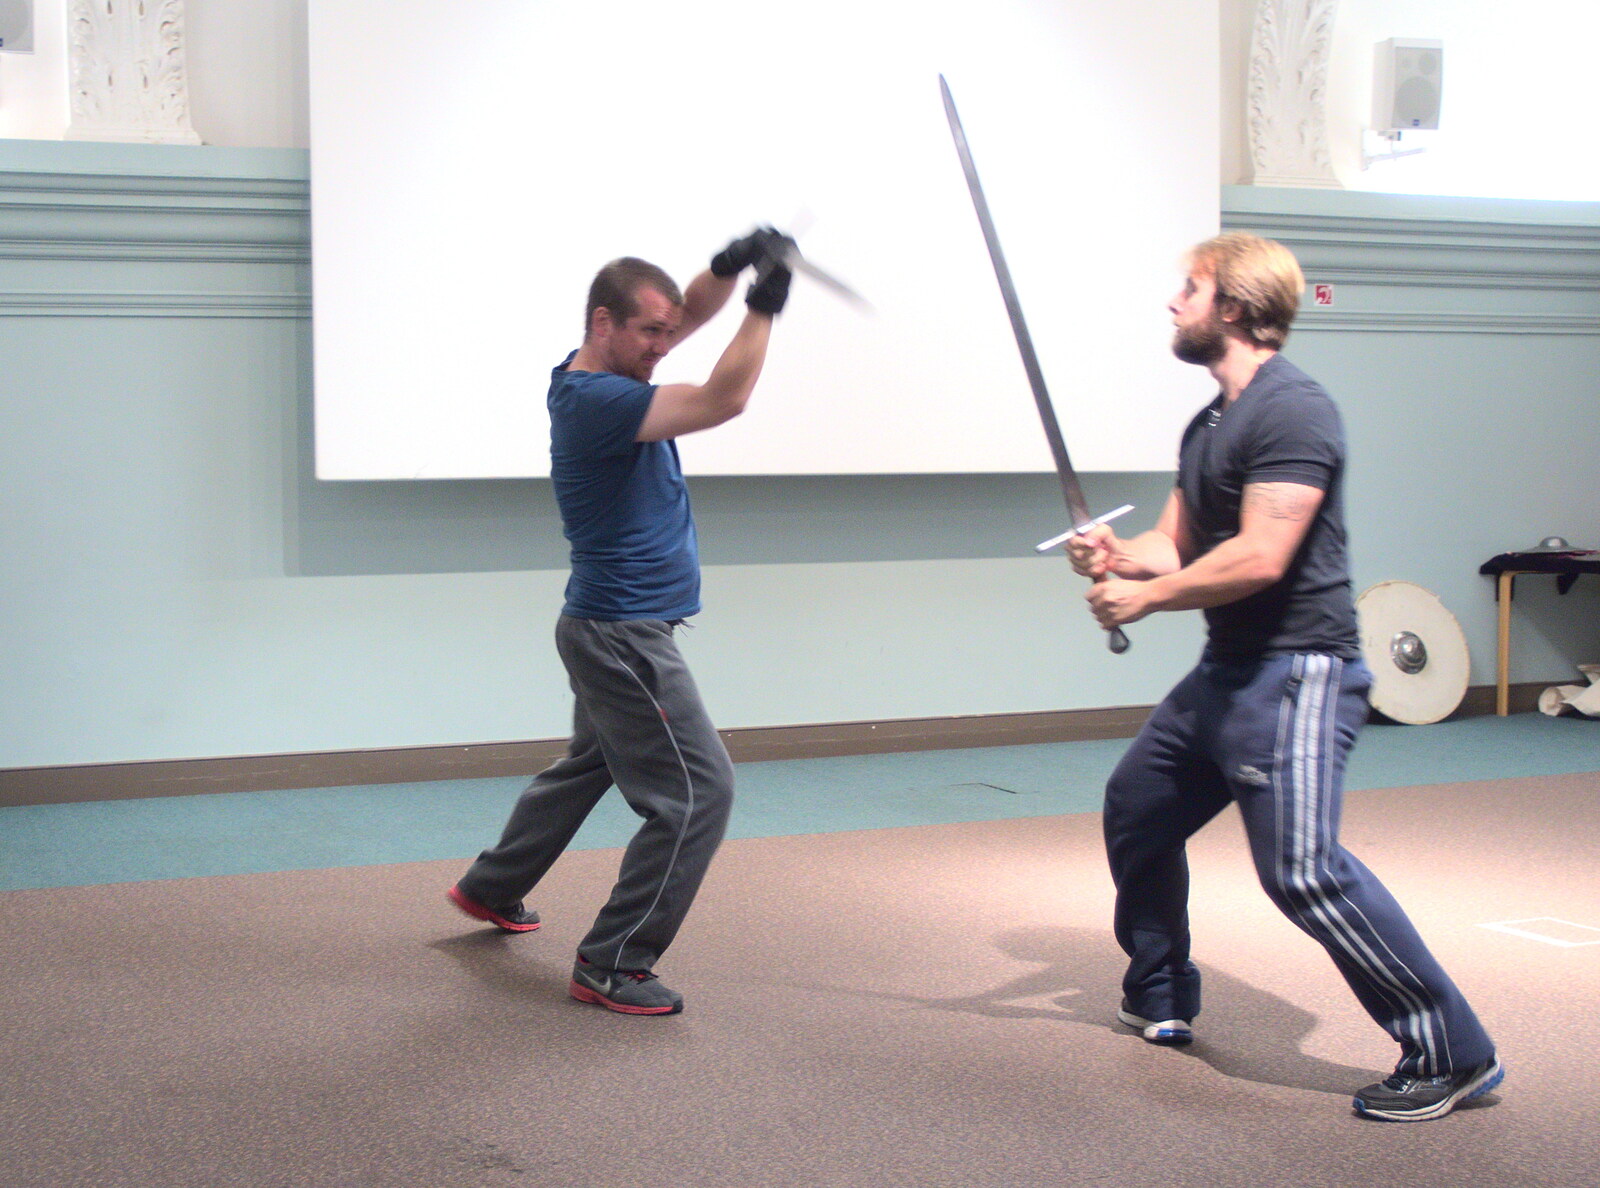 Swordfights at Norwich Castle, Norwich, Norfolk - 31st August 2016: The fight coreographers move on to actual swords